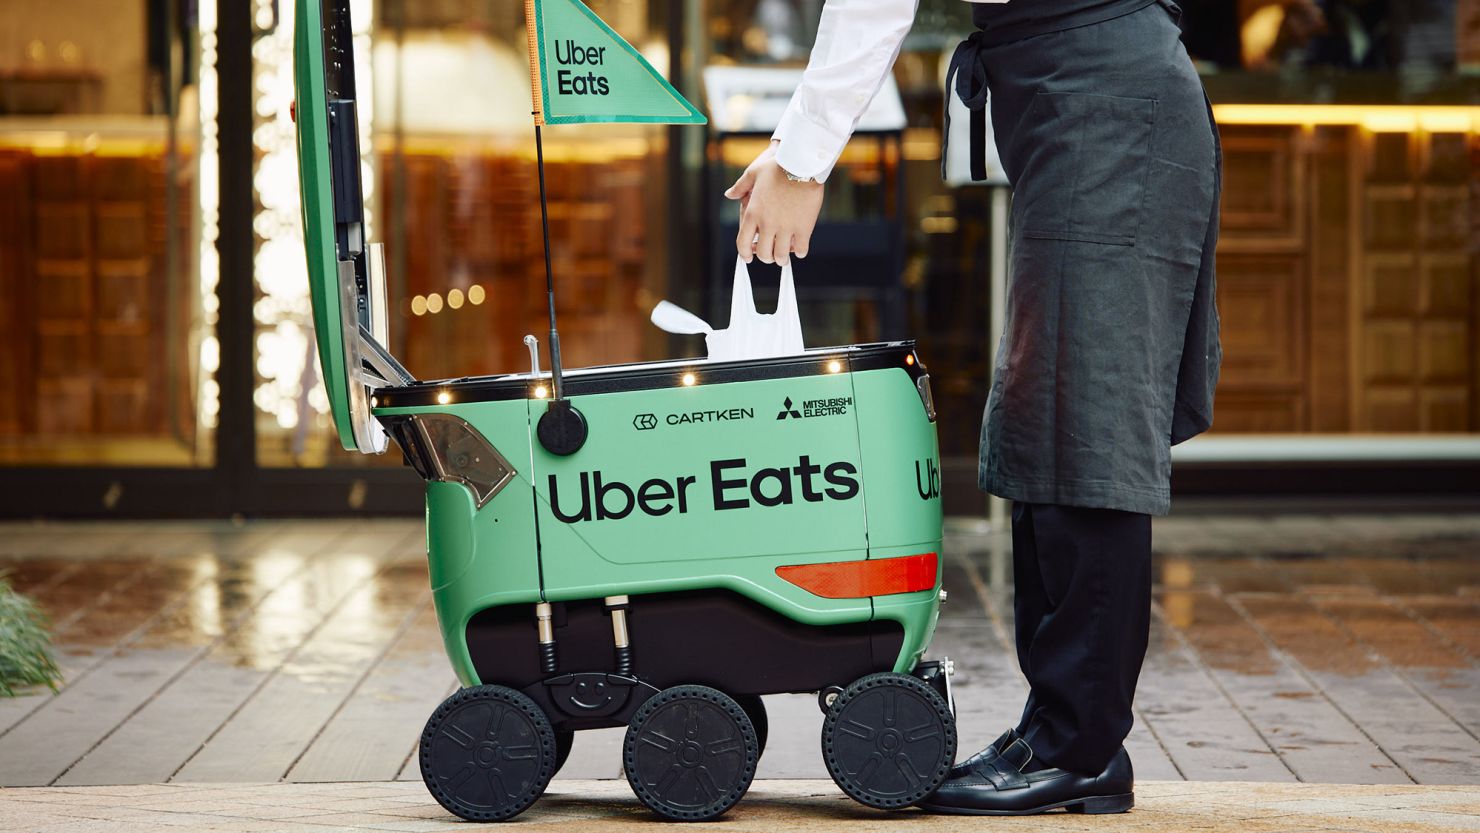 Uber Eats To Launch Robot Delivery Service In Japan